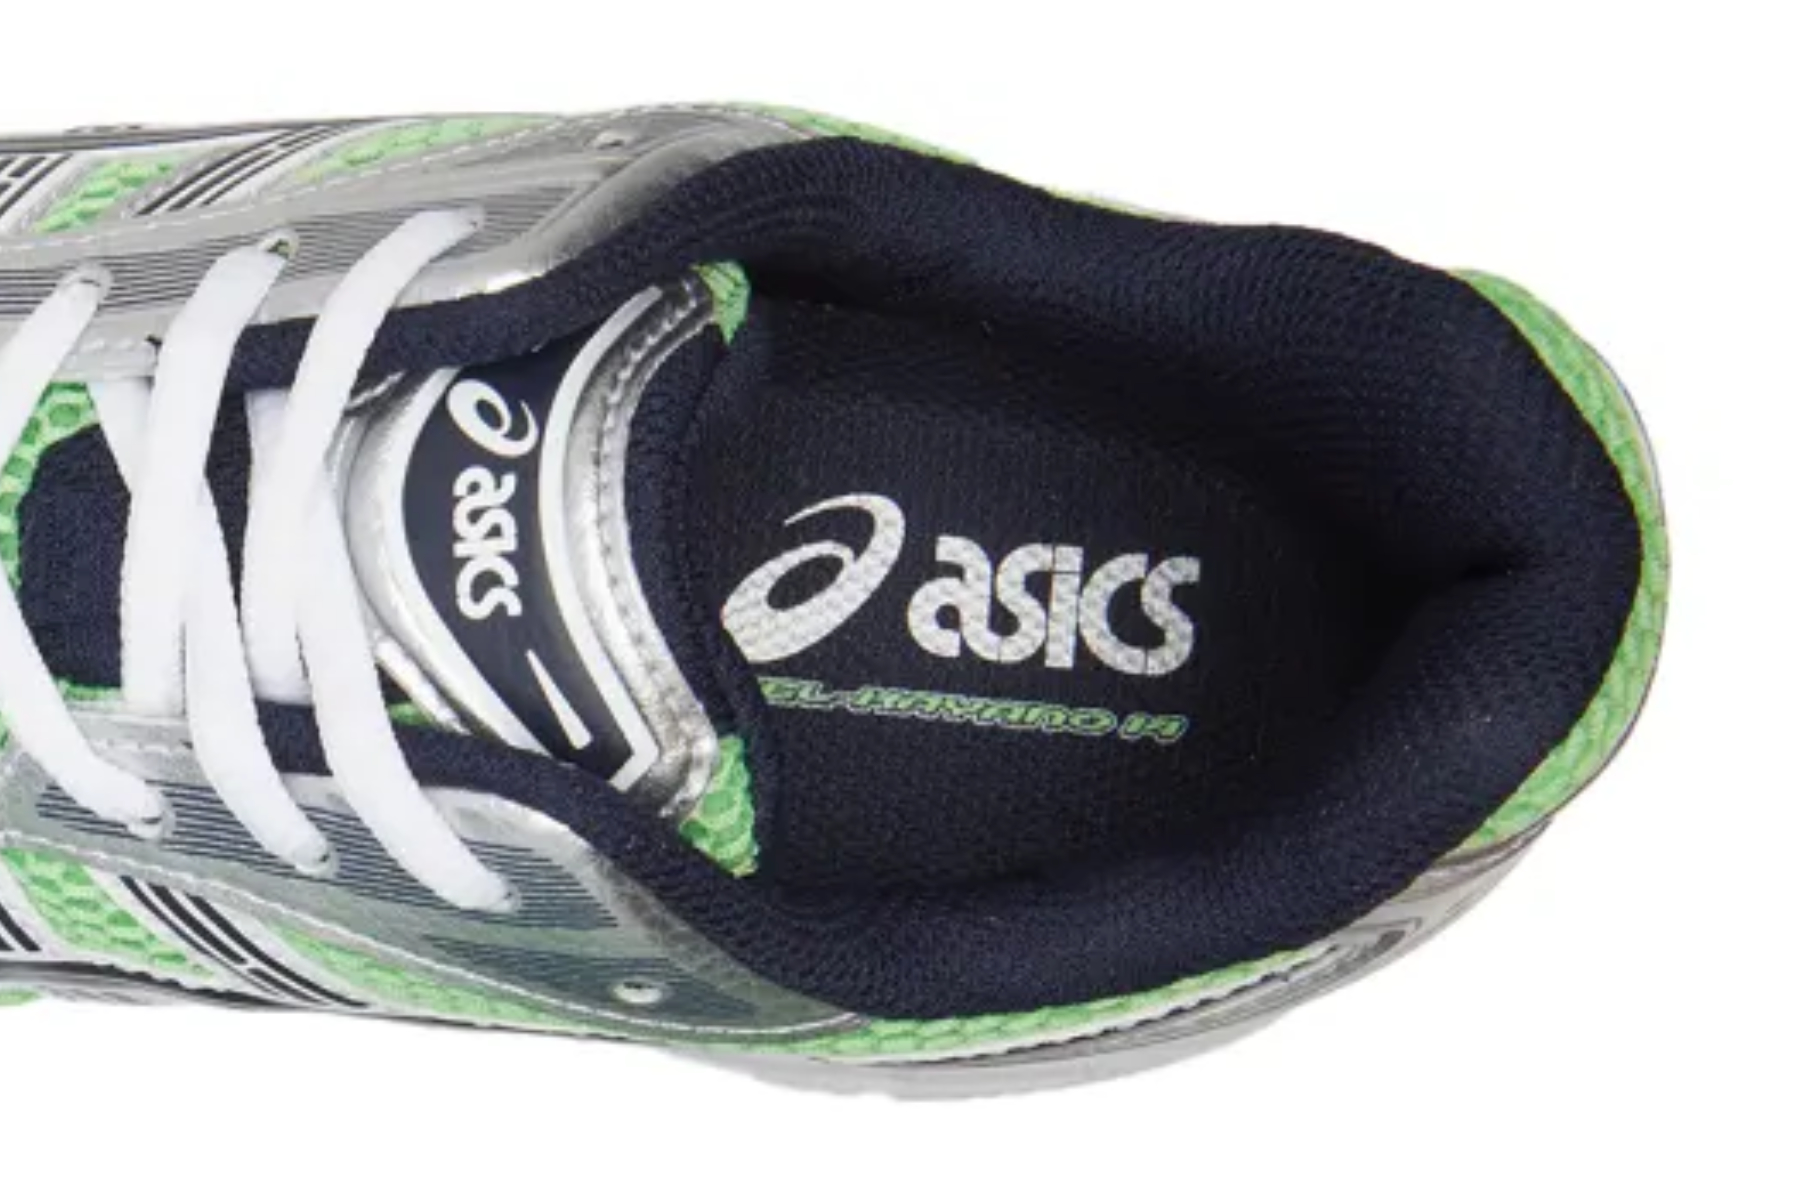 ASICS' GEL-Kayano has been updated as a part of a three collaboration between them, atmos & Undermycar PRESENTS.